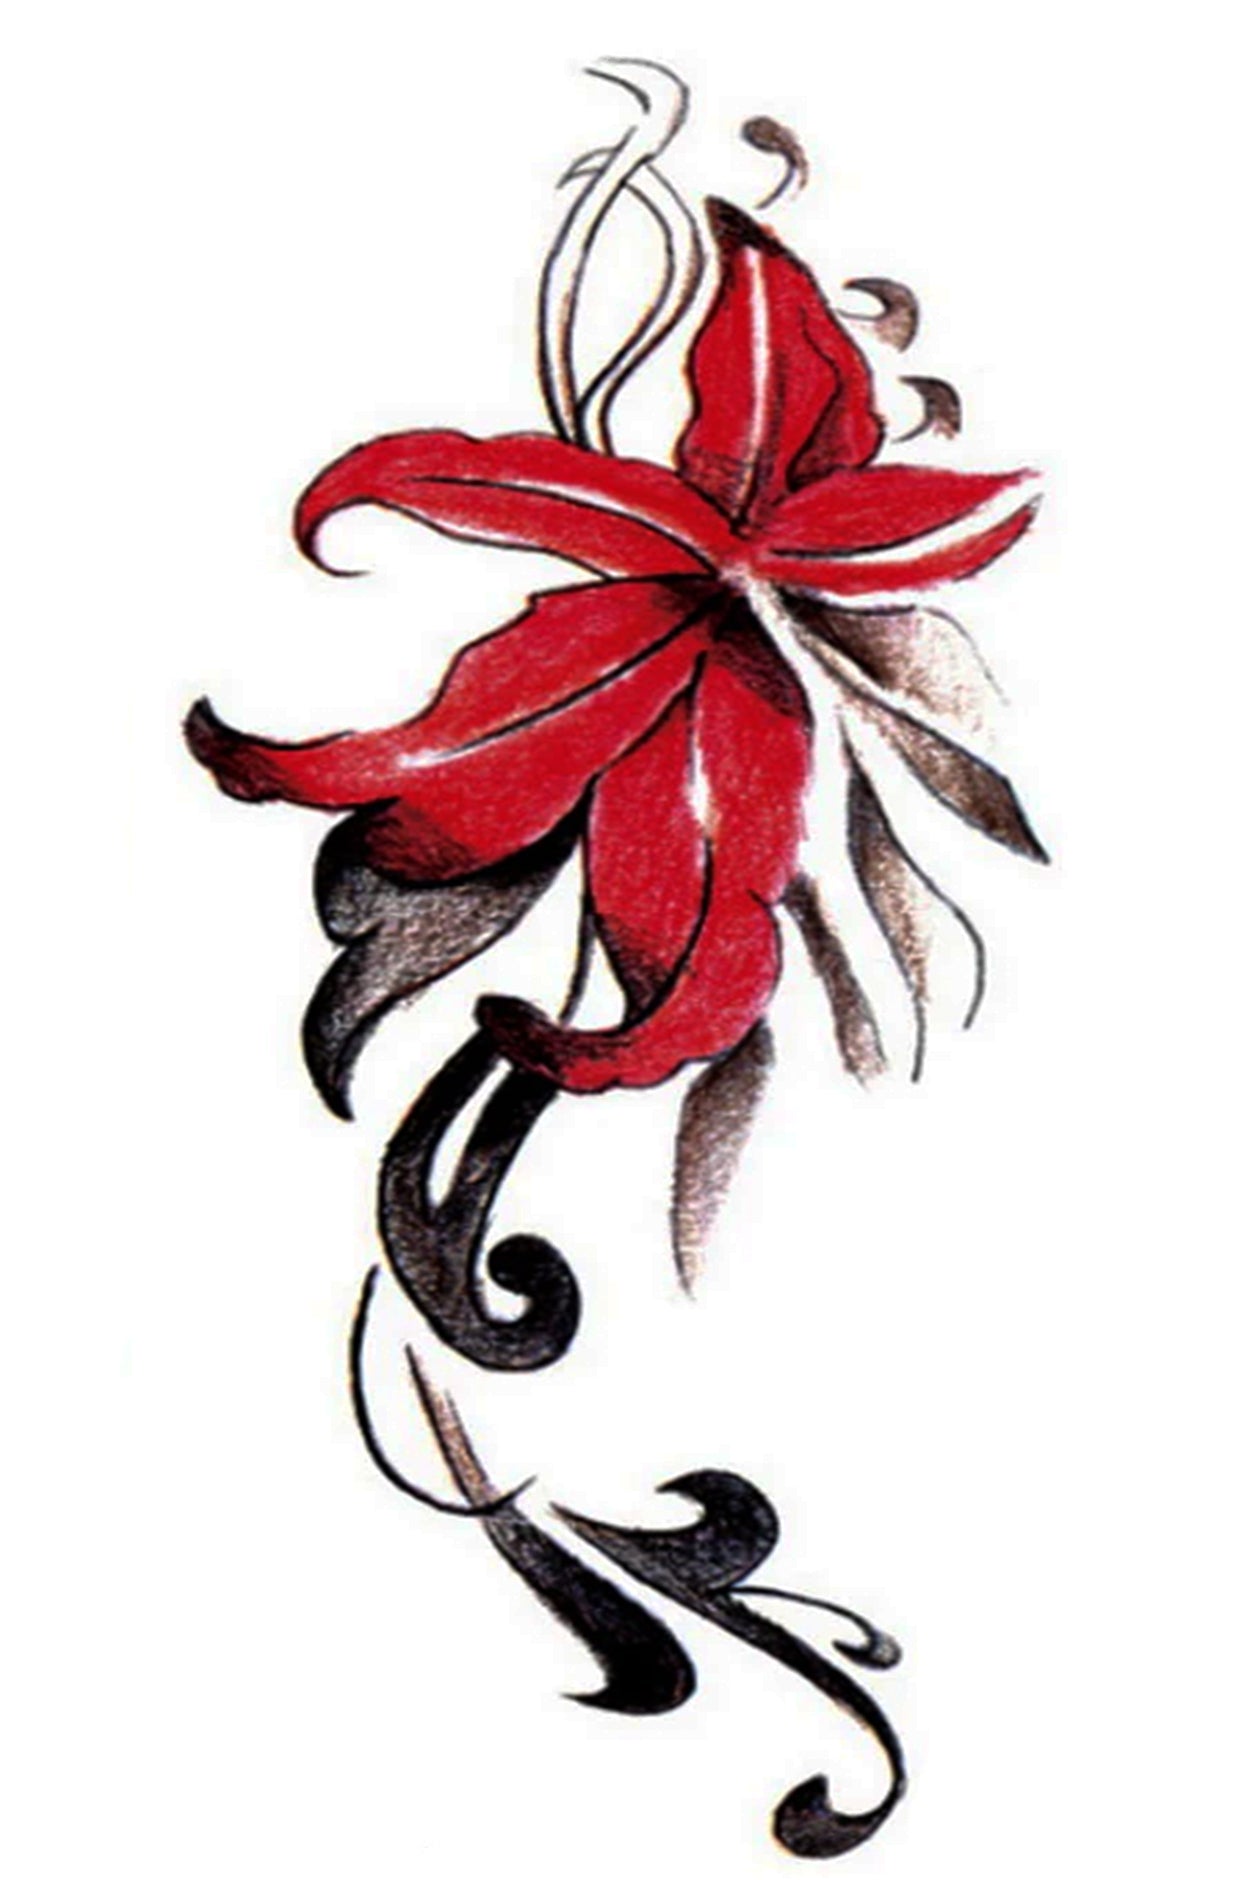 The red-pink lily is artistically drawn as if it is dancing to music. The stem is made of flourishing scrolls, creating a casual air to it. Wear it on the arm, chest, leg, or other body parts for 7-14 days. Red lilies symbolize purity, fertility, and romantic love.  Creatively wear this artwork on any part of your body, arm, leg, torso, or shoulder.